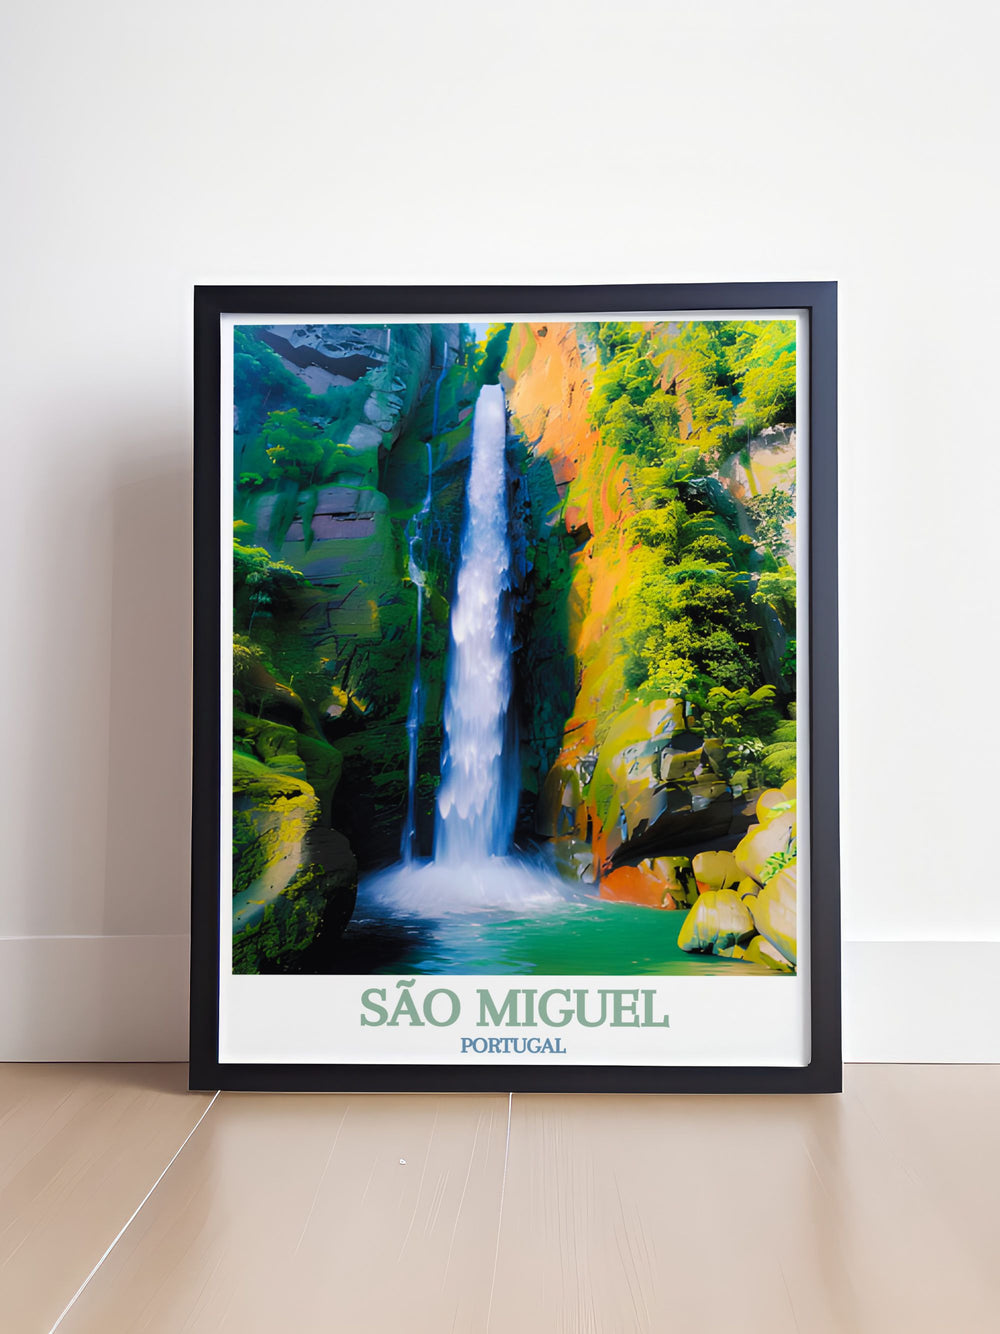 This São Miguel travel poster showcases the enchanting beauty of Salto do Cabrito, with its vibrant greenery and cascading waterfalls. Ideal for enhancing your home with island charm.